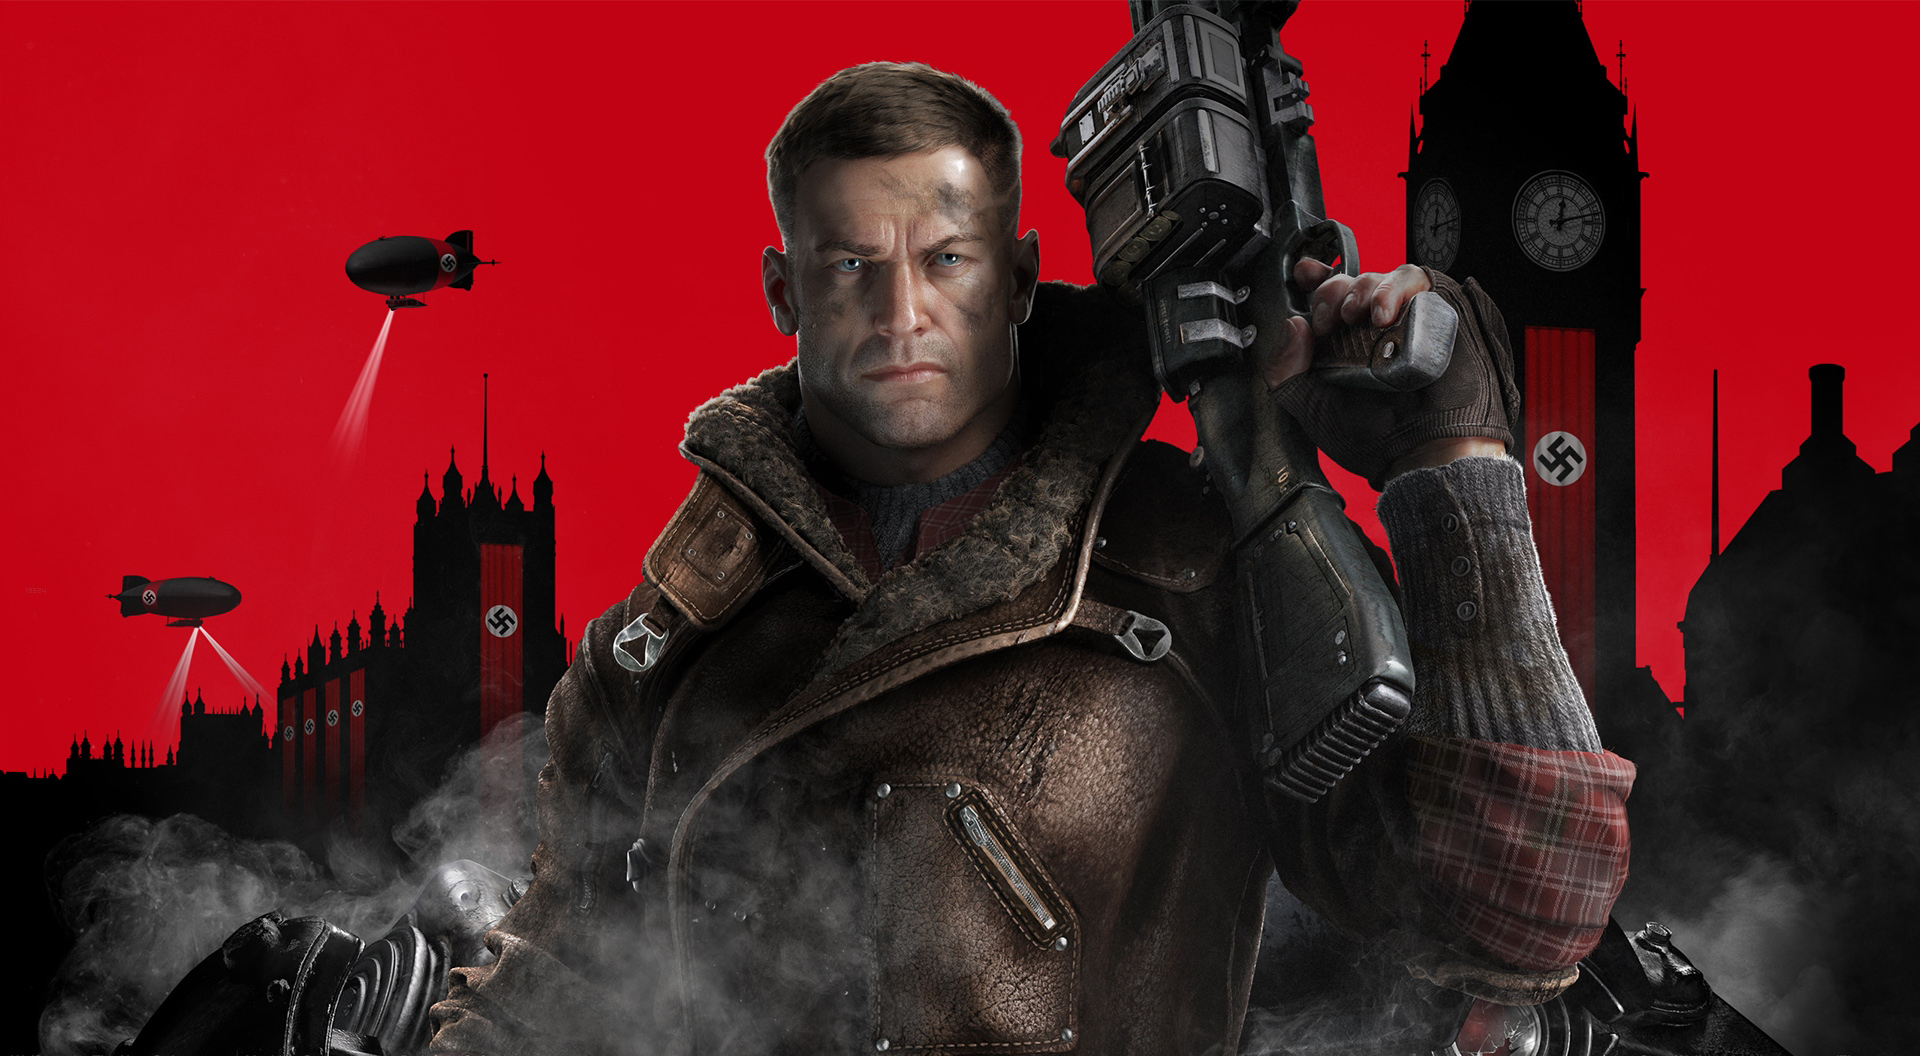 Wolfenstein 2: The New Colossus - How To Farm Enigma Codes & Max